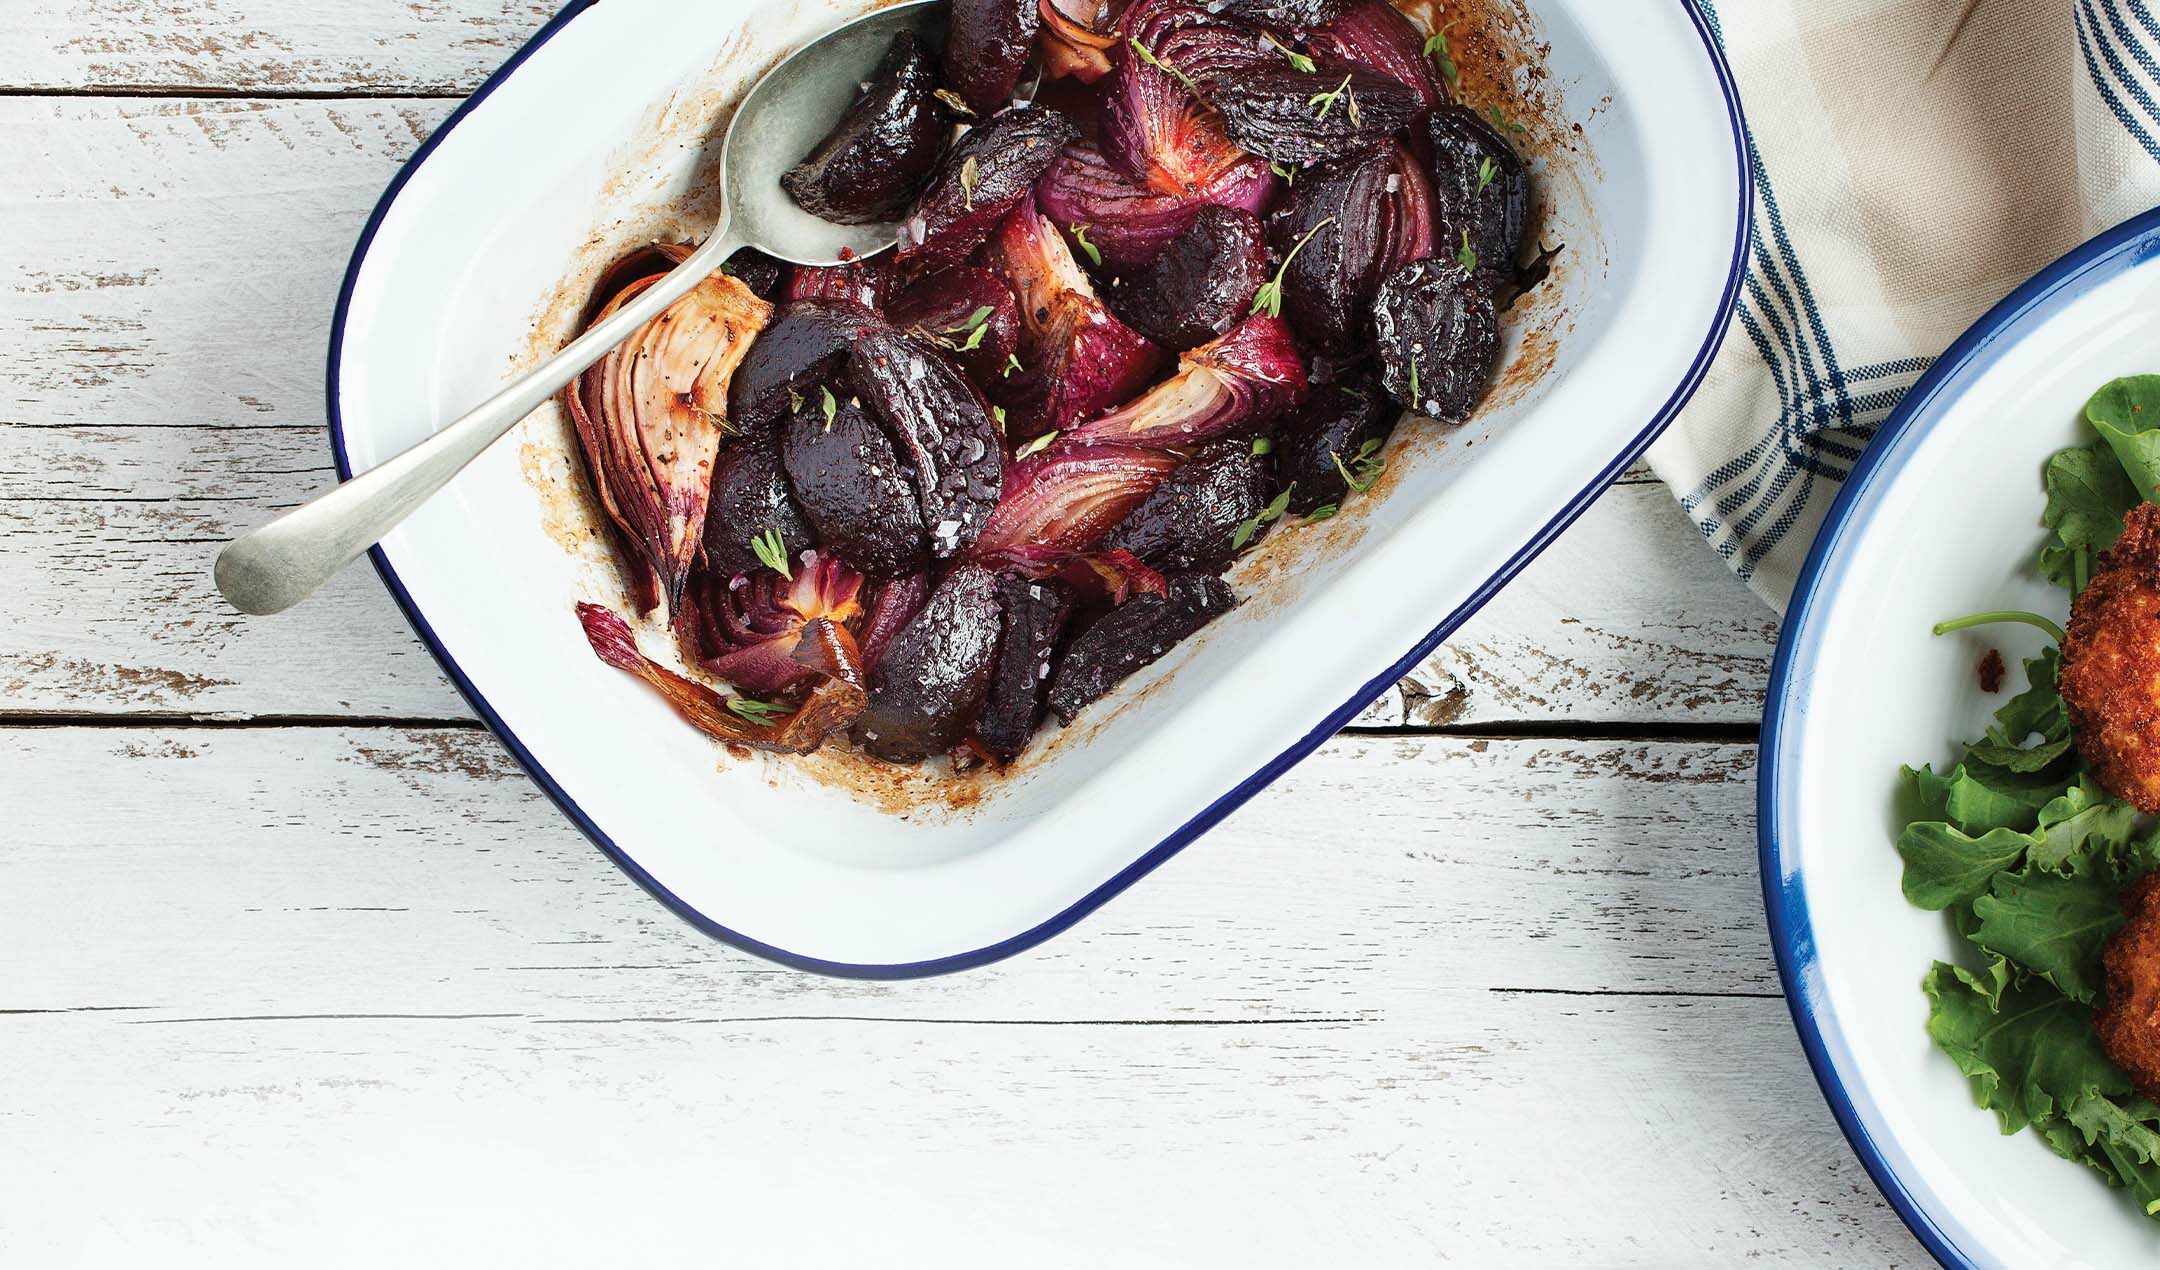 Red onion and beetroot bake recipe | easyFood